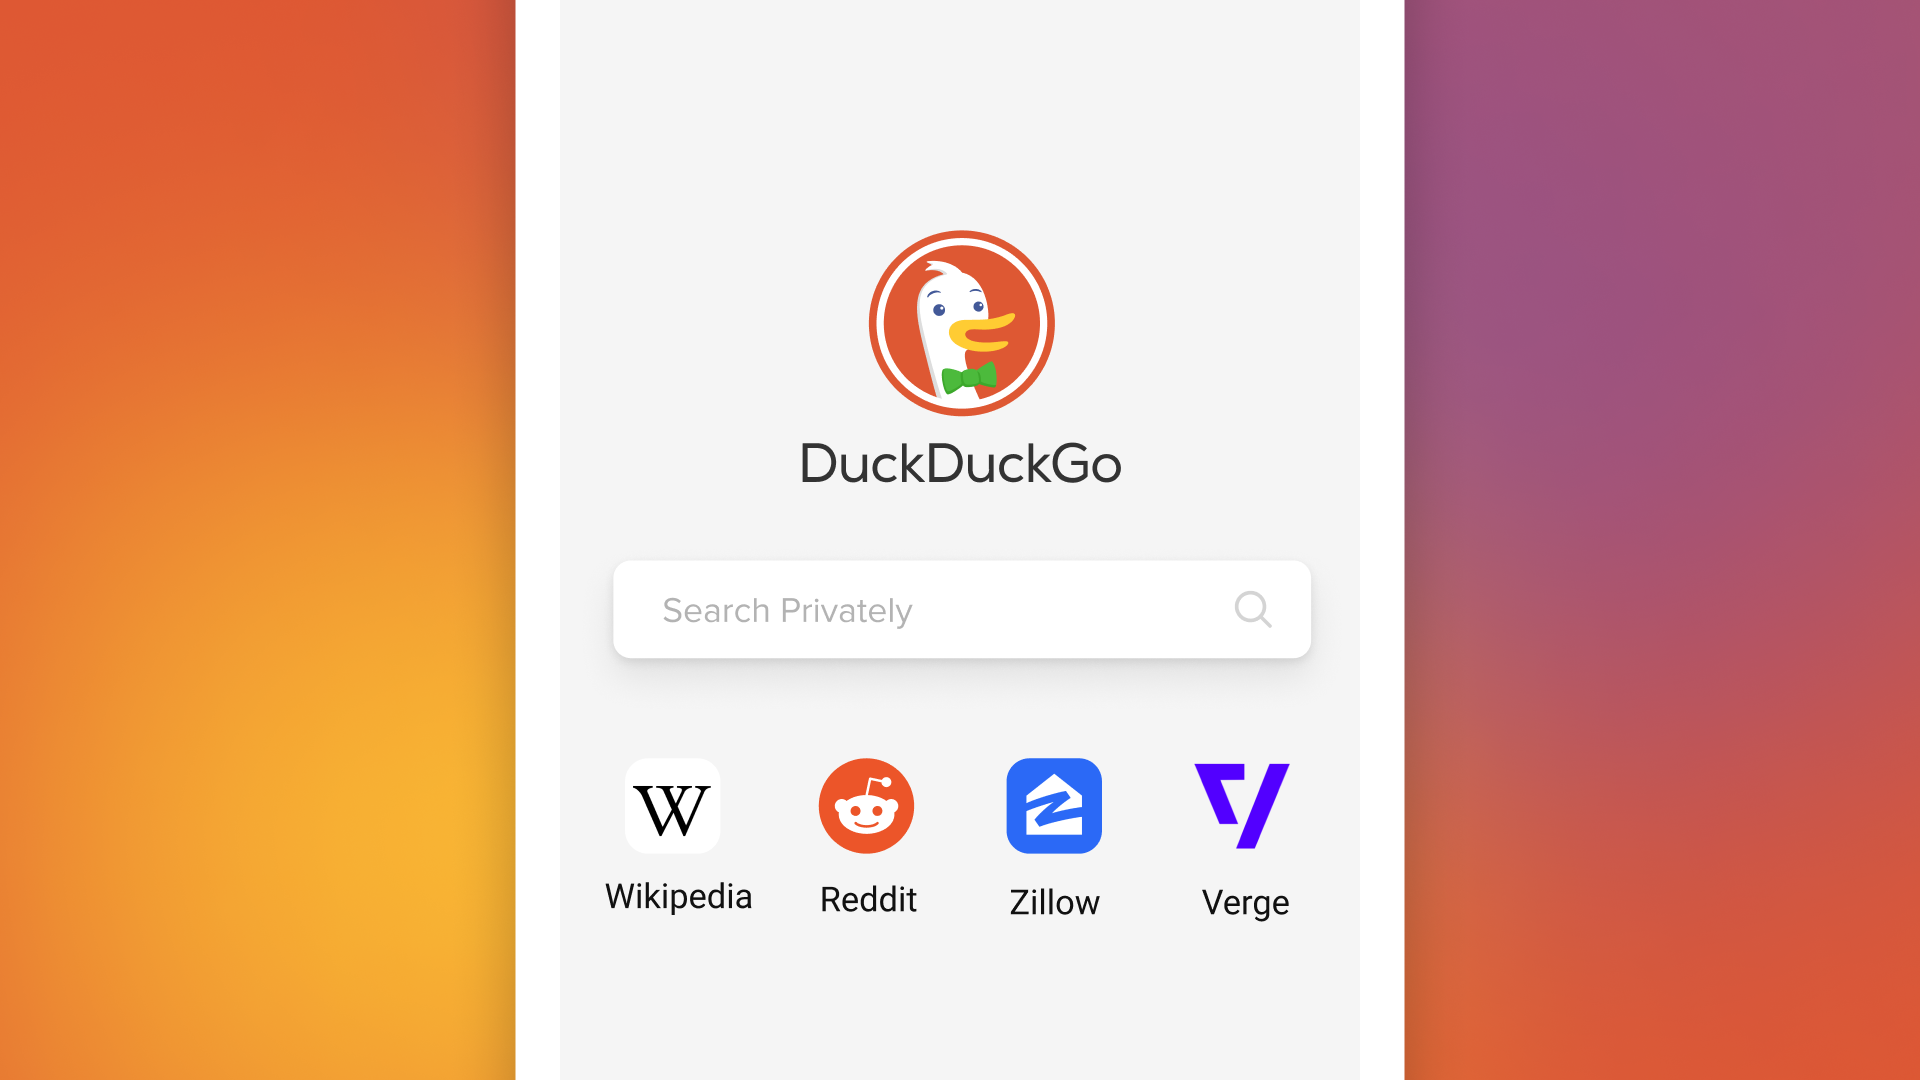 DuckDuckGo hero image for Android